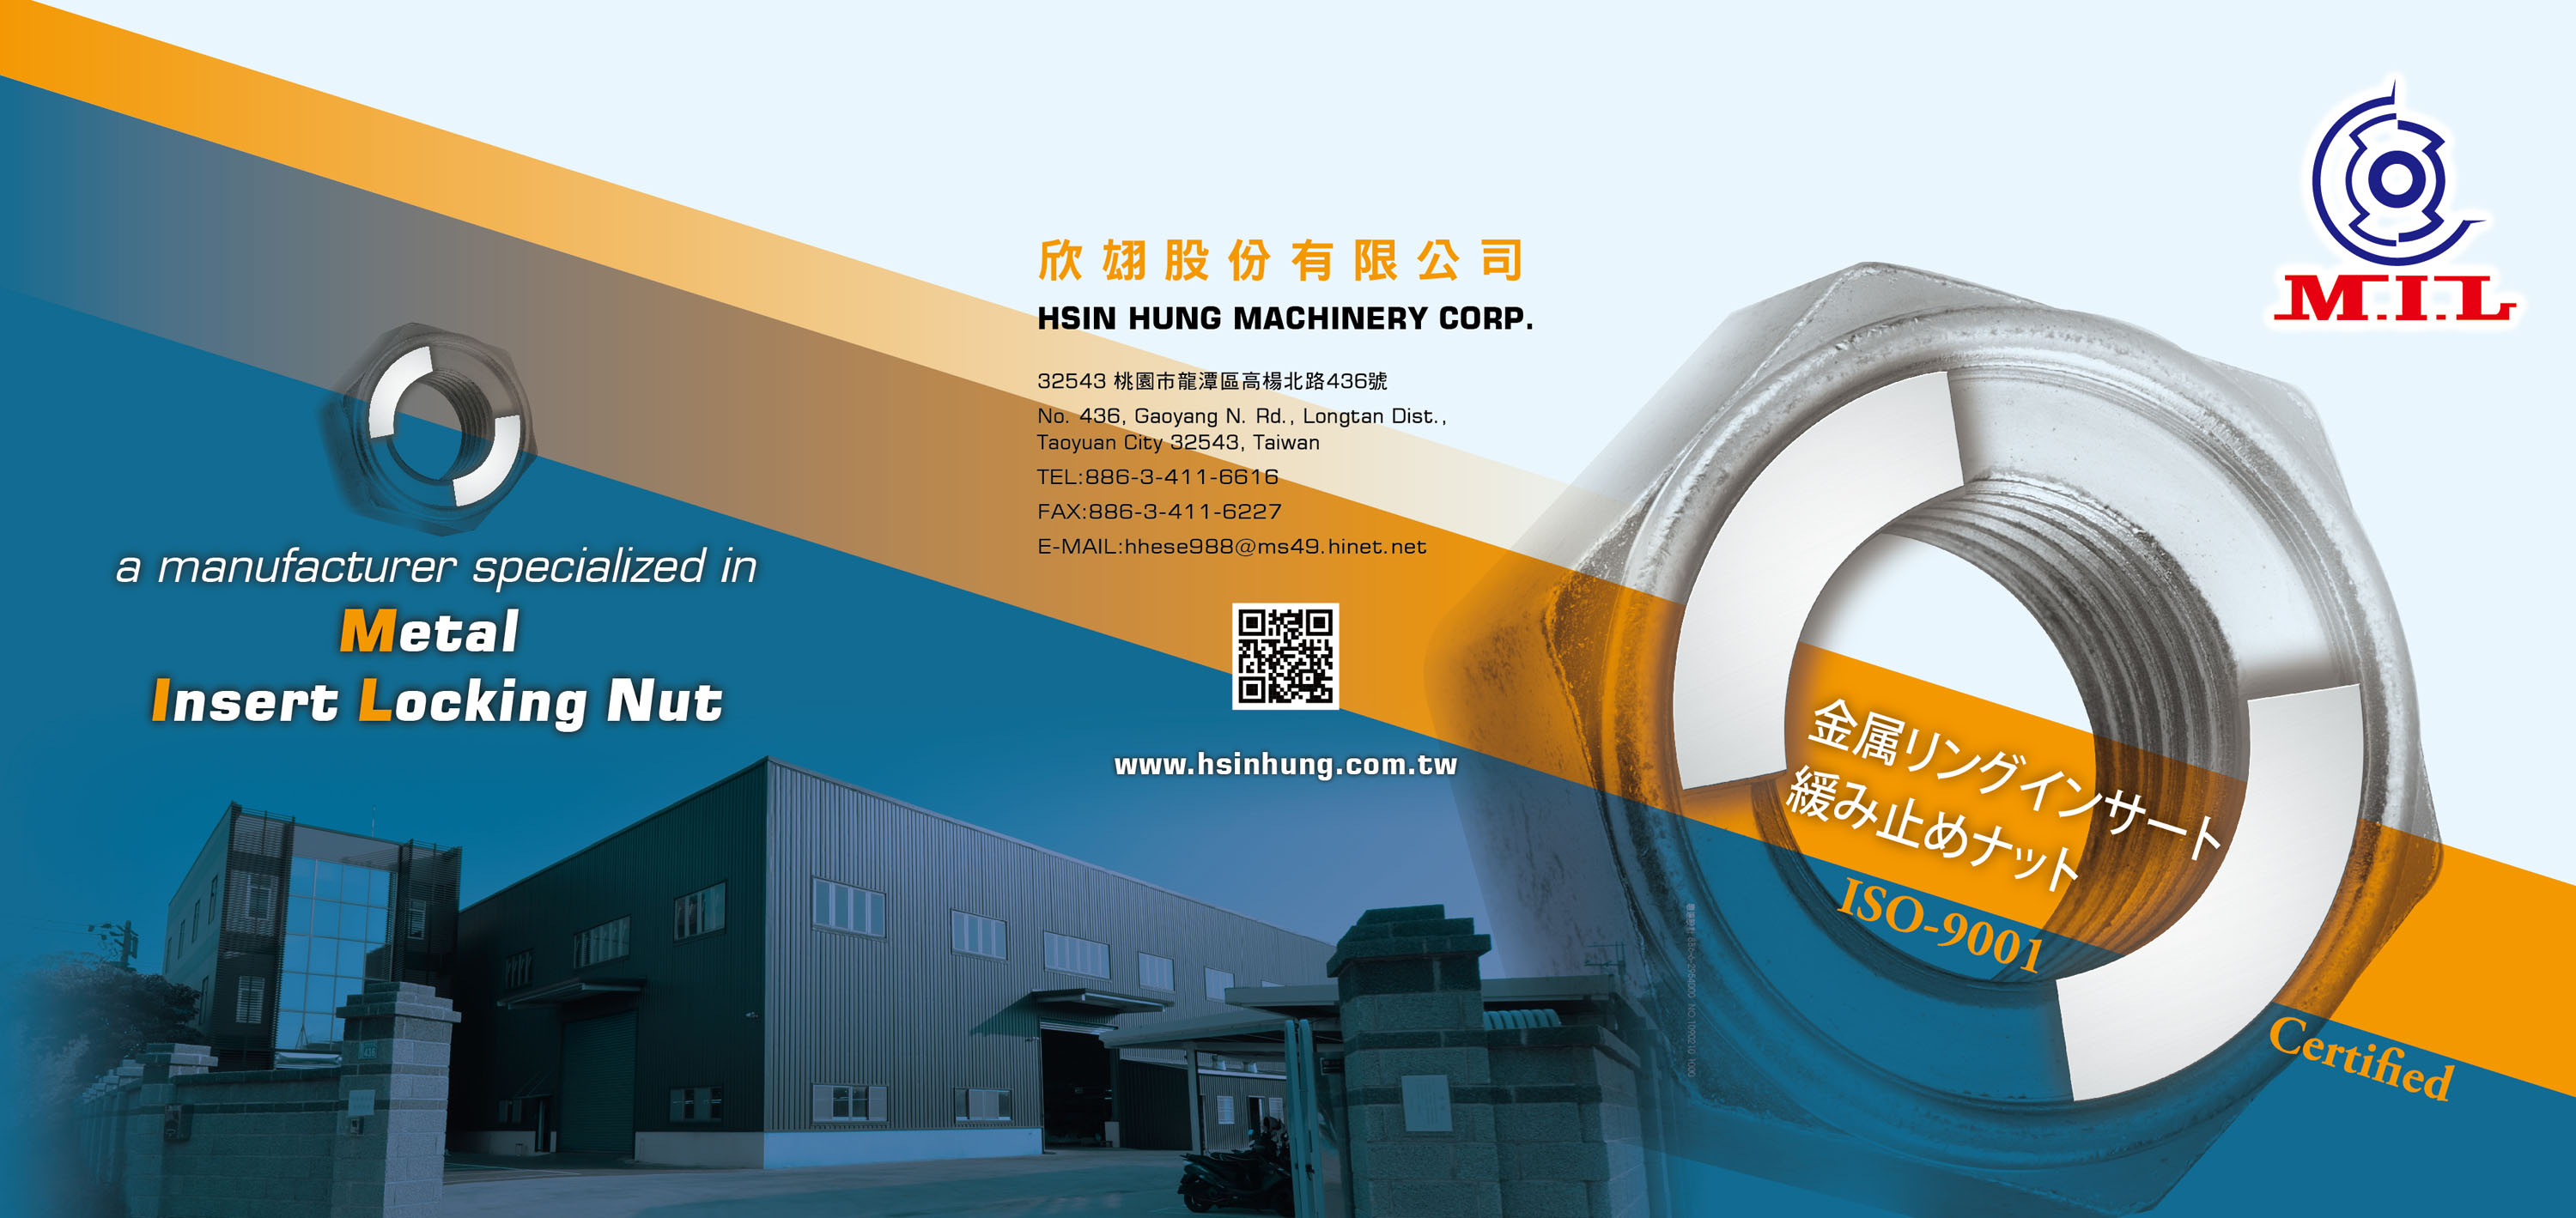 HSIN HUNG MACHINERY CORP. _Online Catalogues